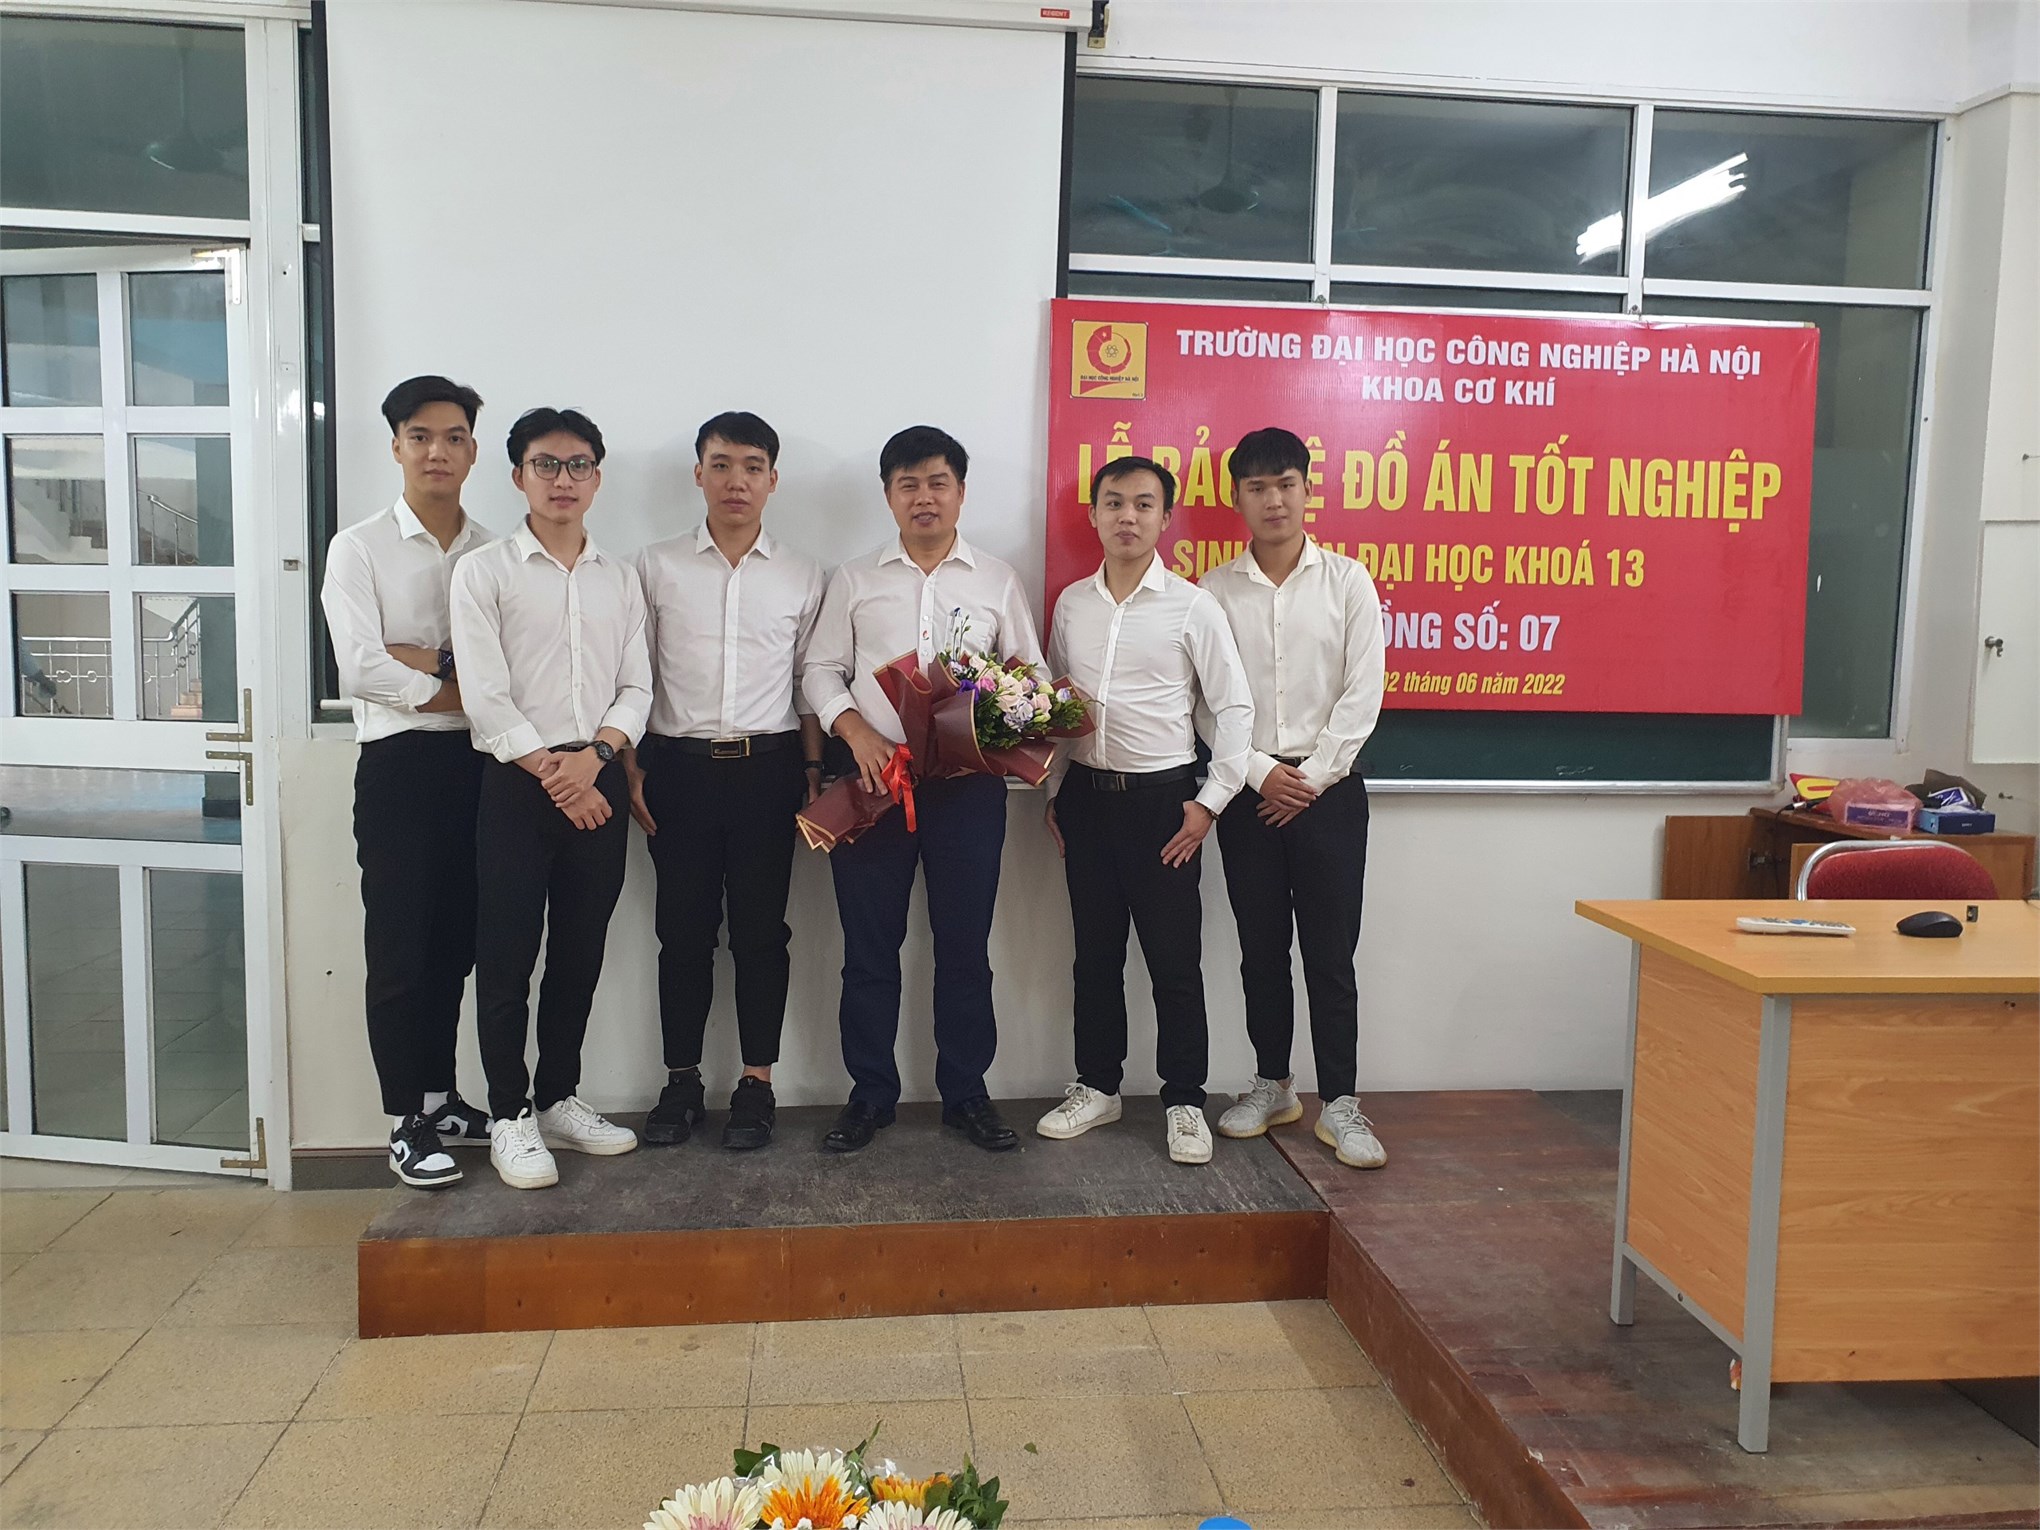 Students of Faculty of Mechanical Engineering with a study on designing and manufacturing 3D printing equipment (AM) integrated on CNC milling machines improve efficiency in plastic injection mold manufacturing